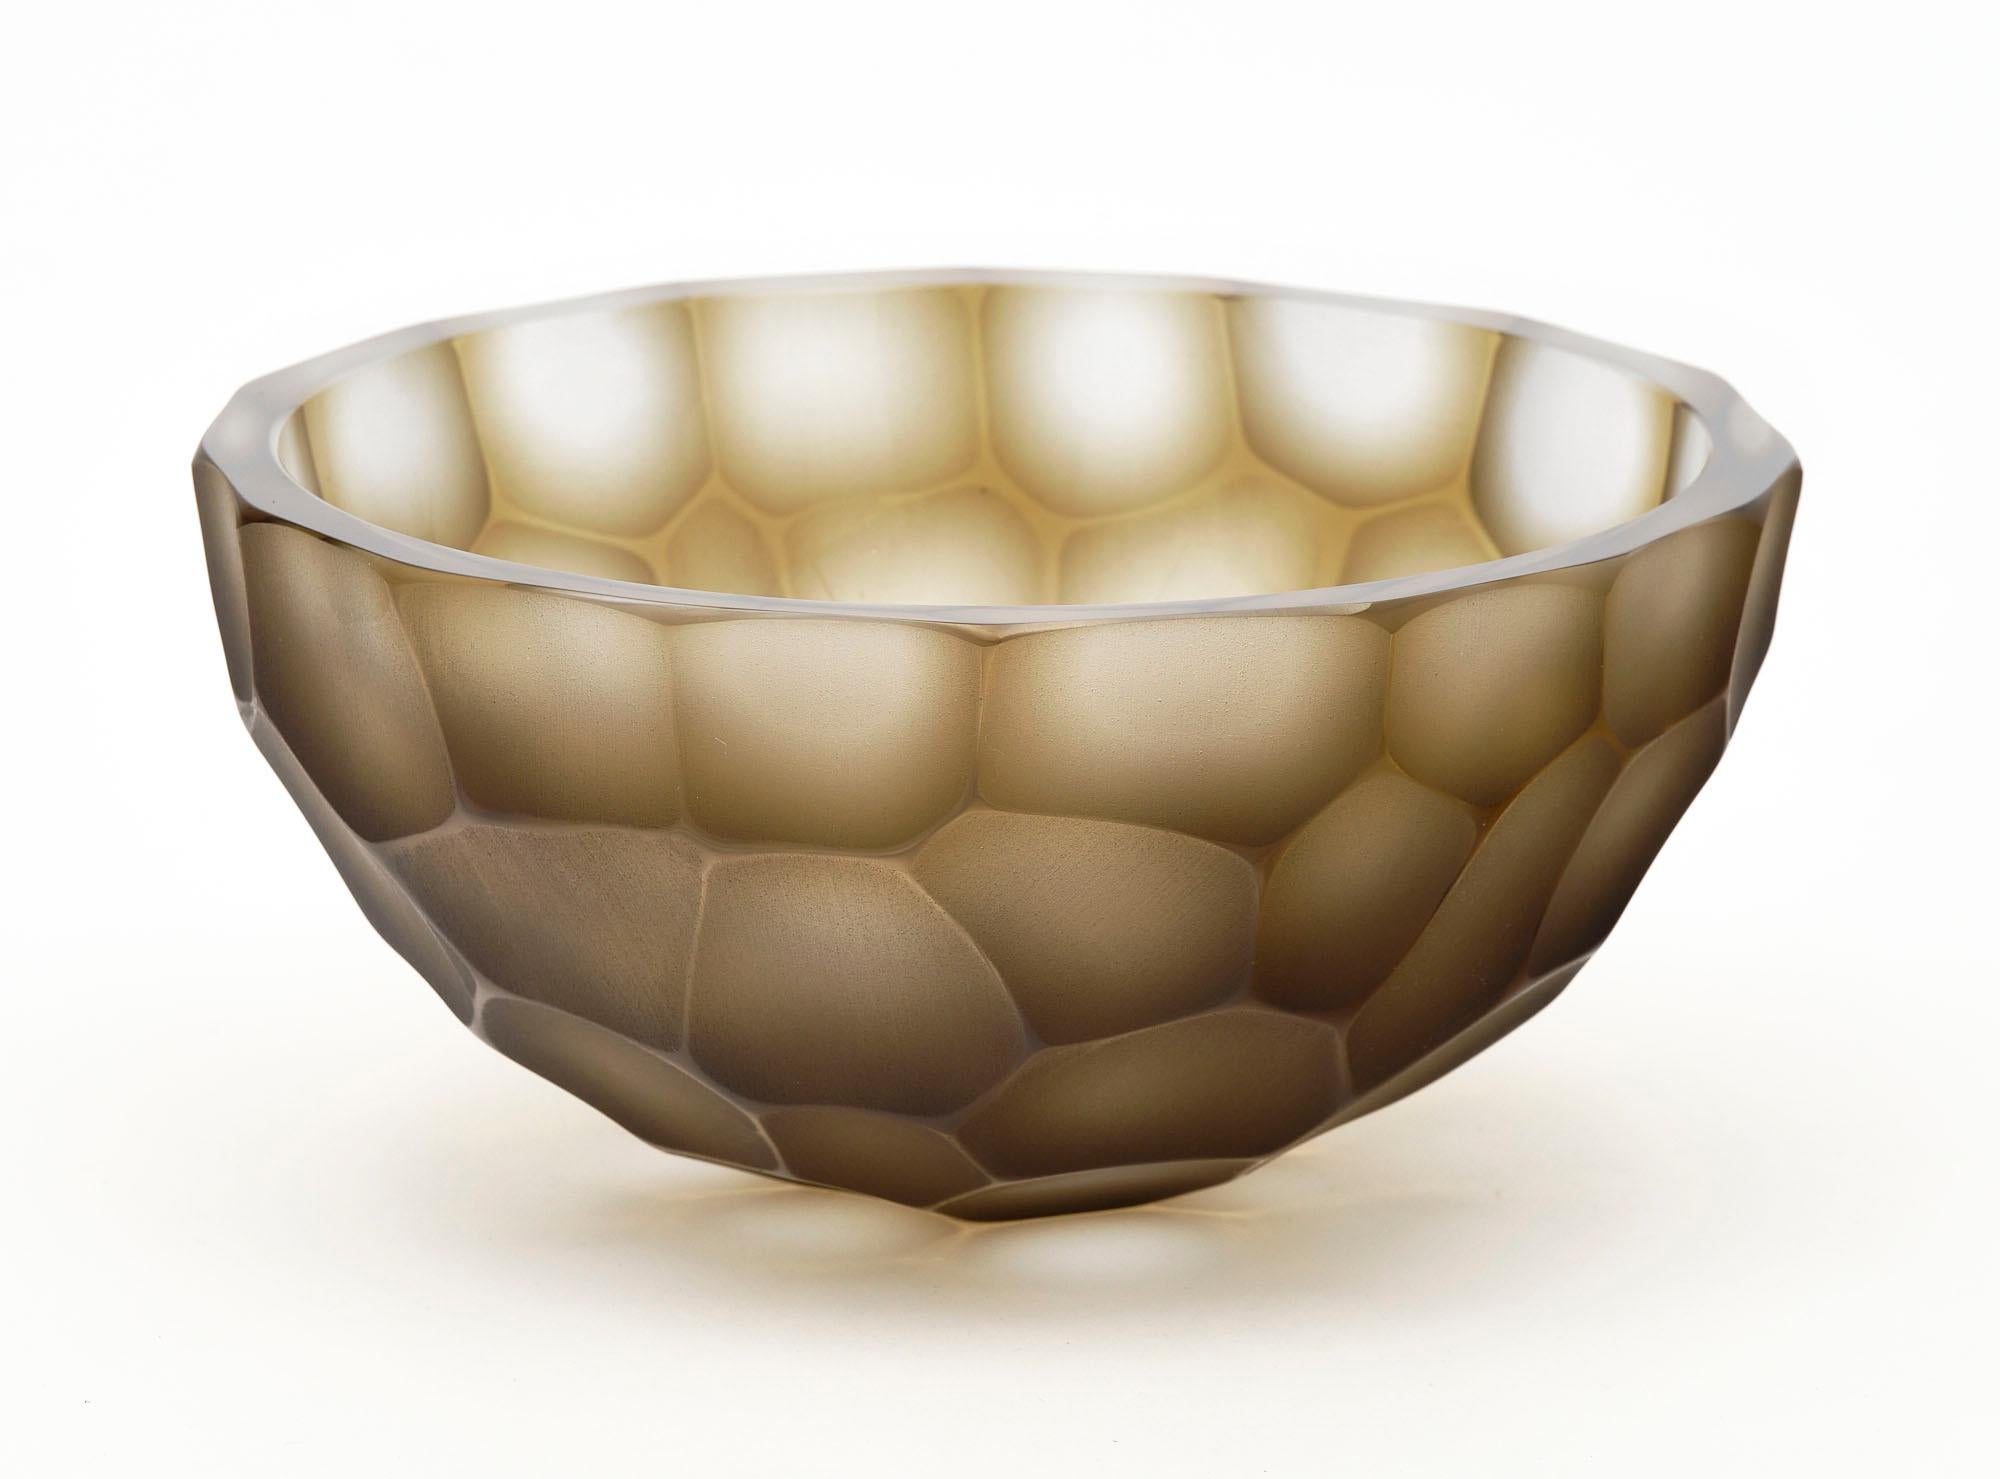 Pair of bowls from the island of Murano made of hand-blown glass in a smoked color. They have been crafted in the ferro battuto technique and are signed by Seguso.